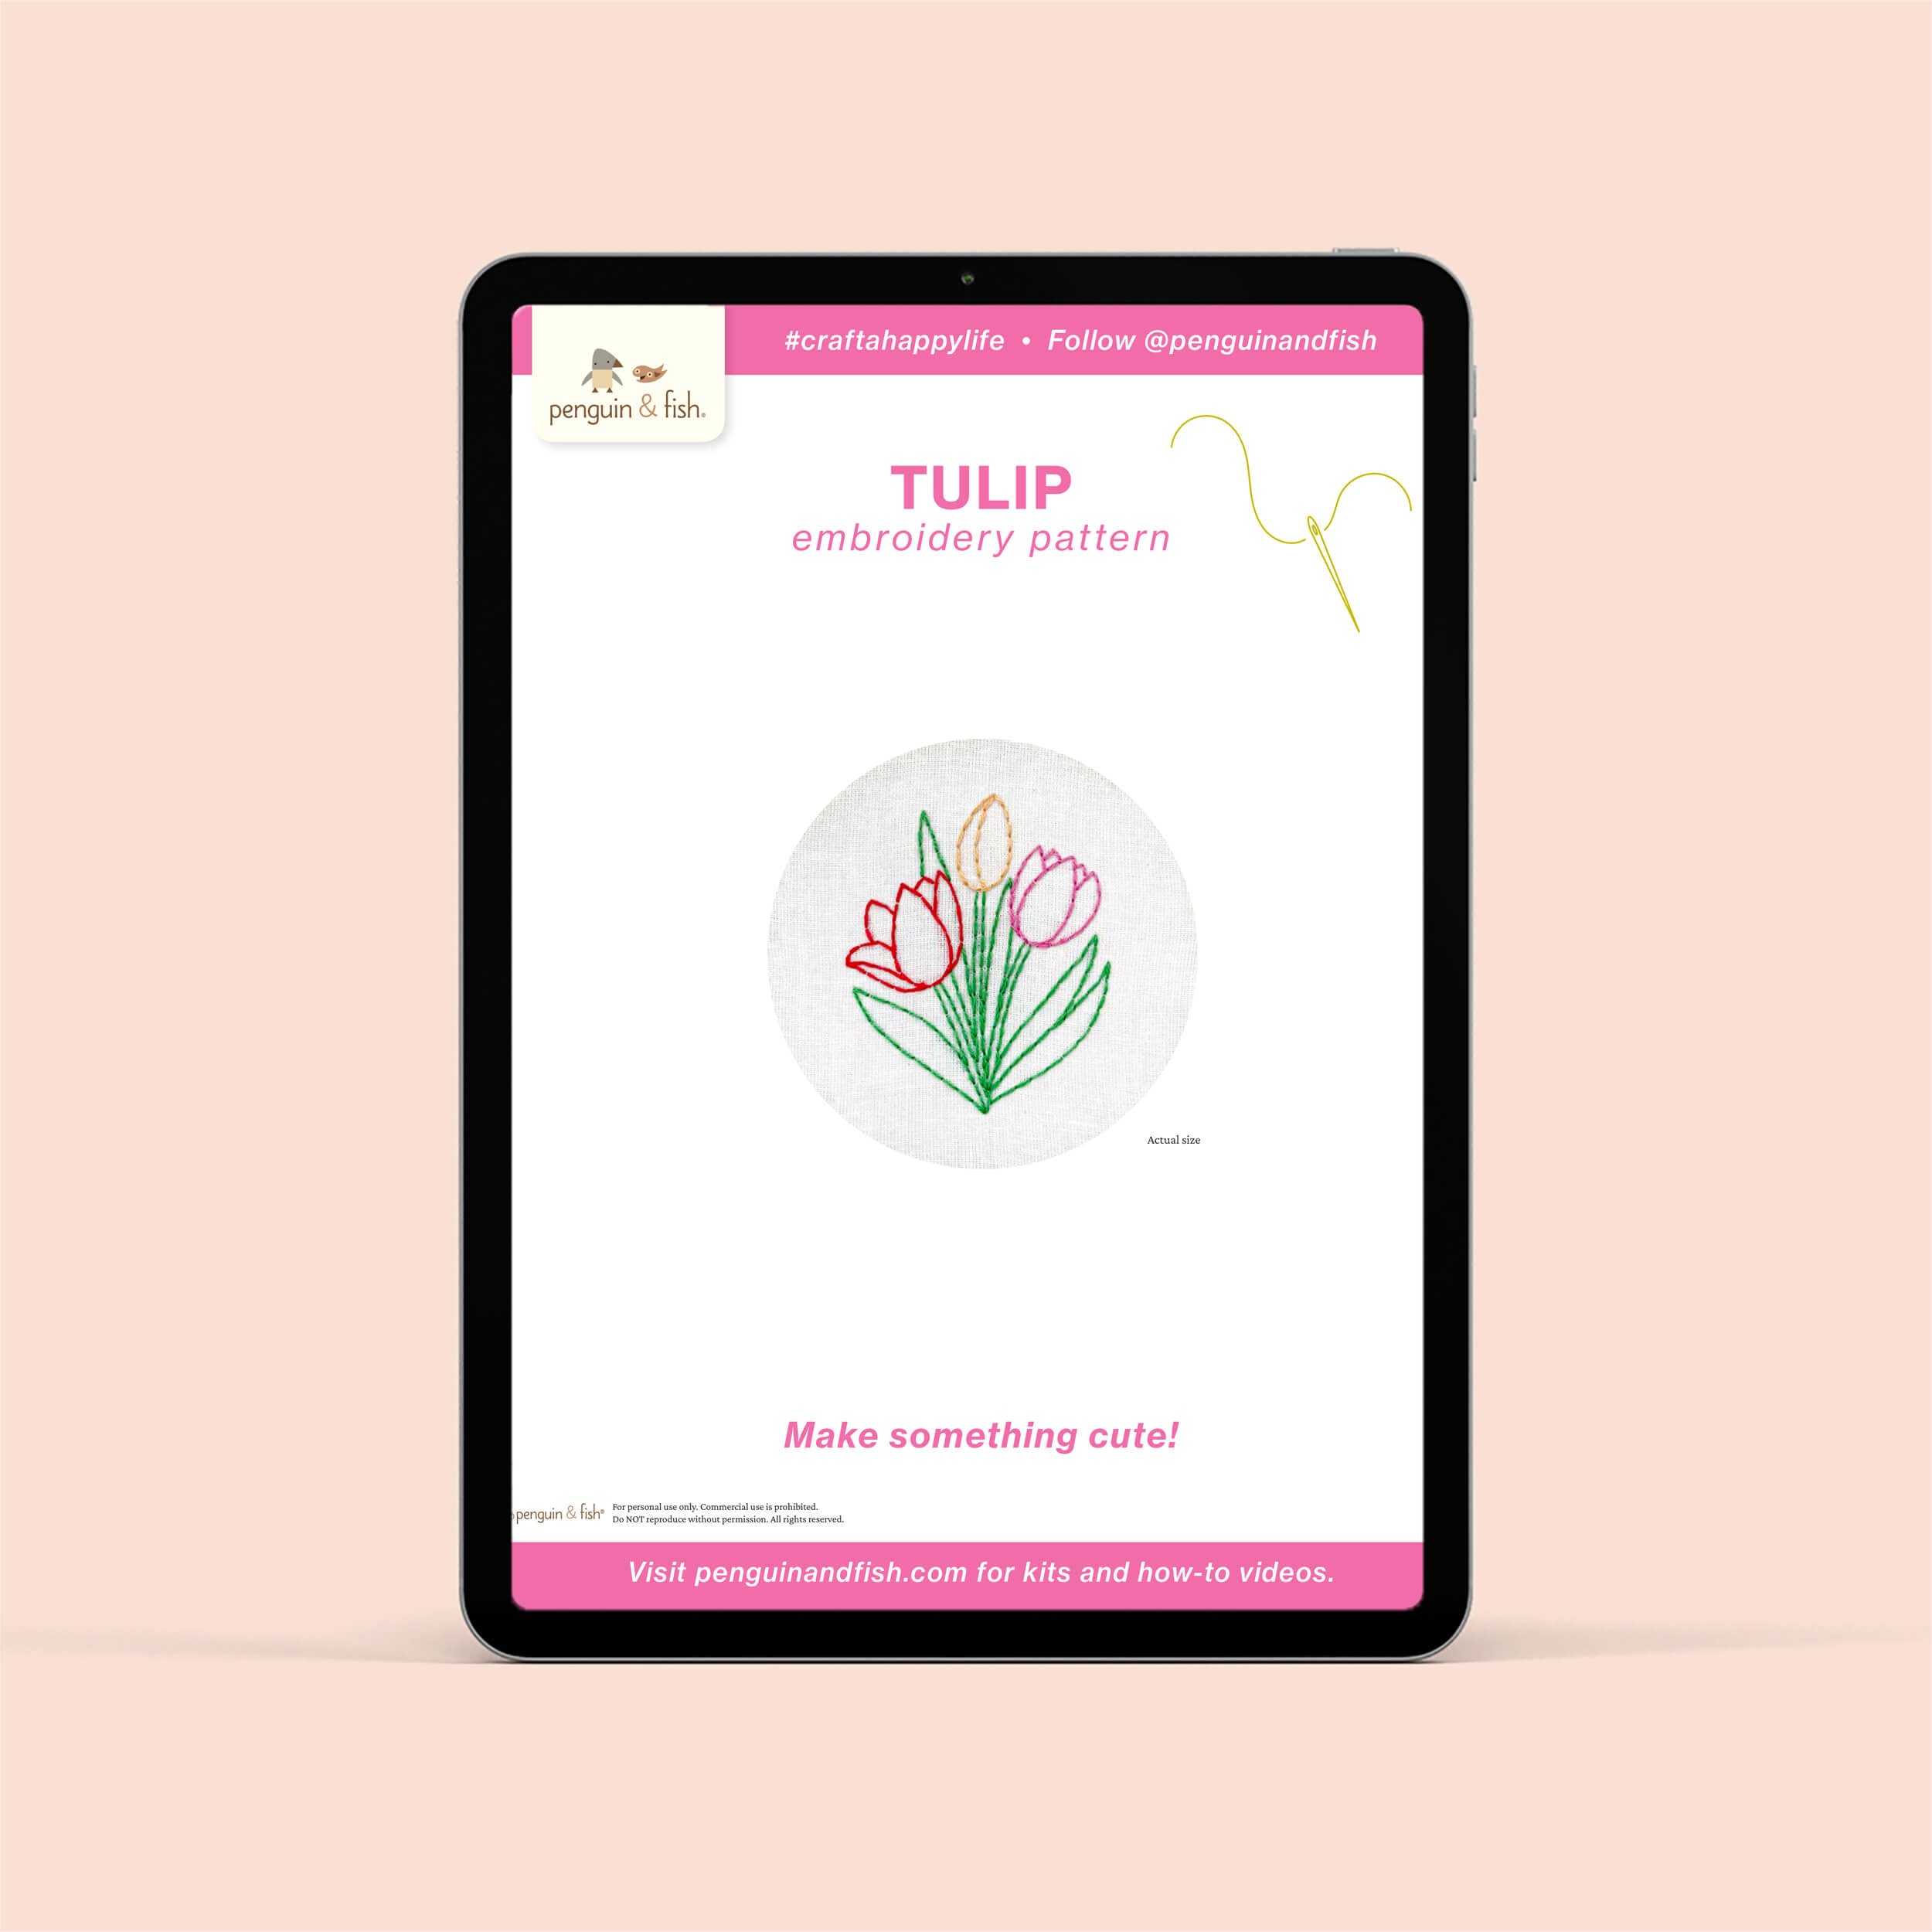 Tulip PDF embroidery pattern shown on a tablet